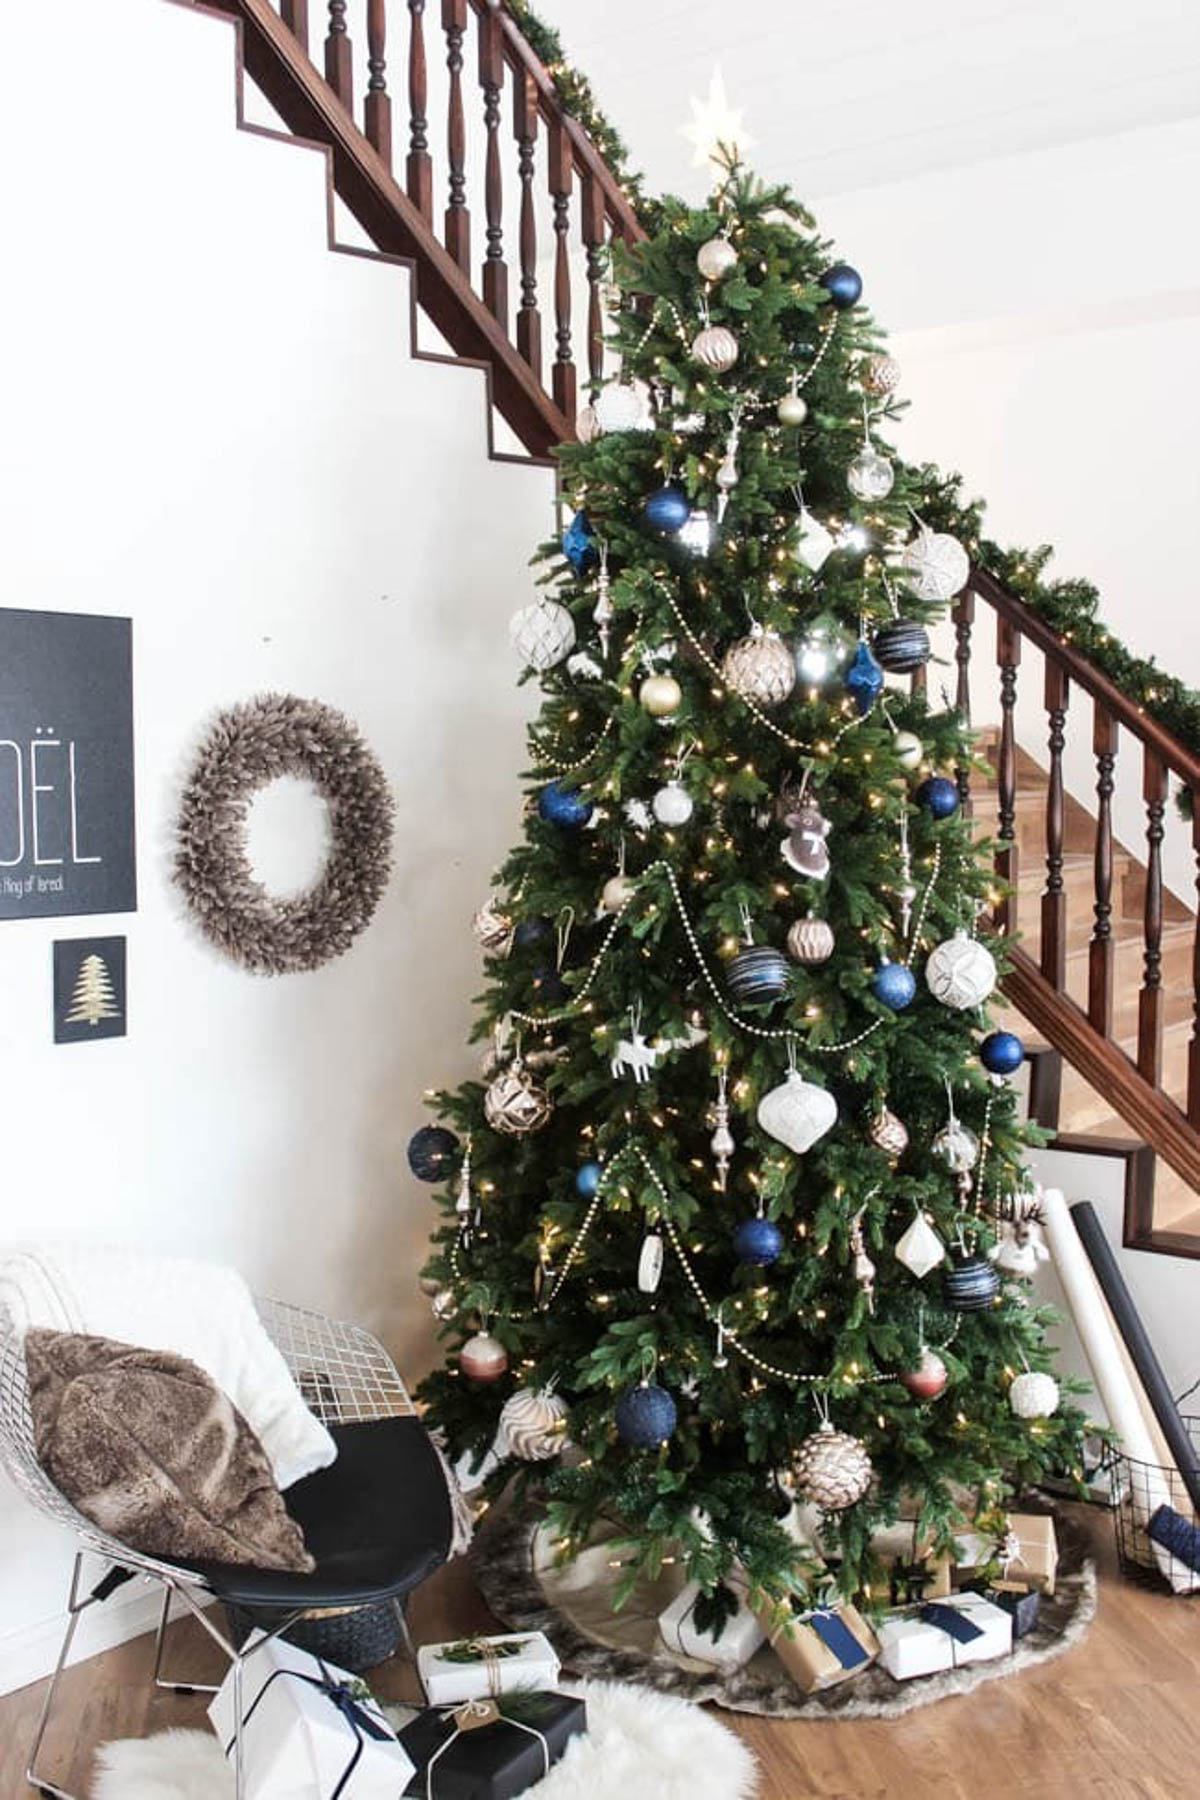 Decorated designer Christmas tree near a banister.